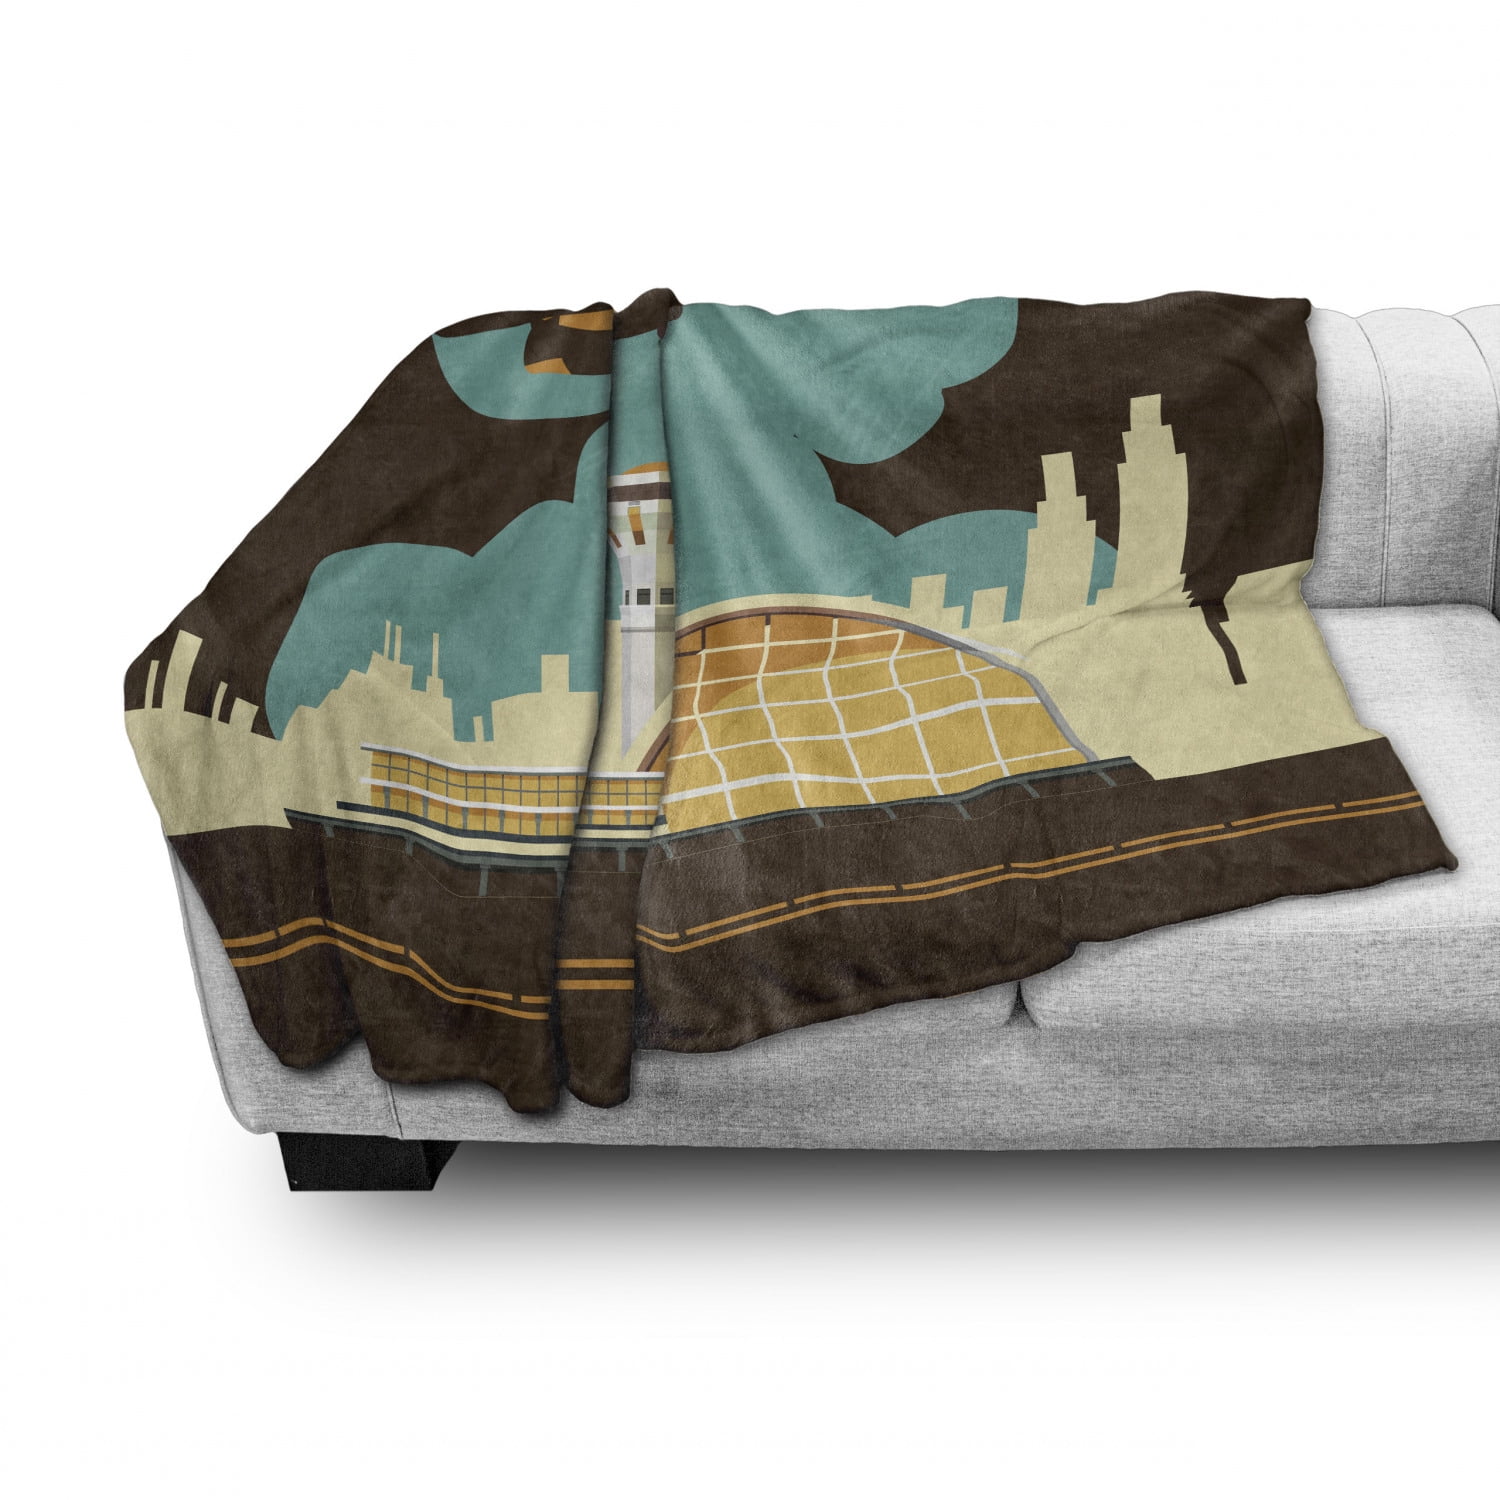 Cozy Plush for Indoor and Outdoor Use 50 x 60 Ambesonne Airport Soft Flannel Fleece Throw Blanket Retro Style Image Airfield Plane and Cityscape Dark Brown Cadet Blue 